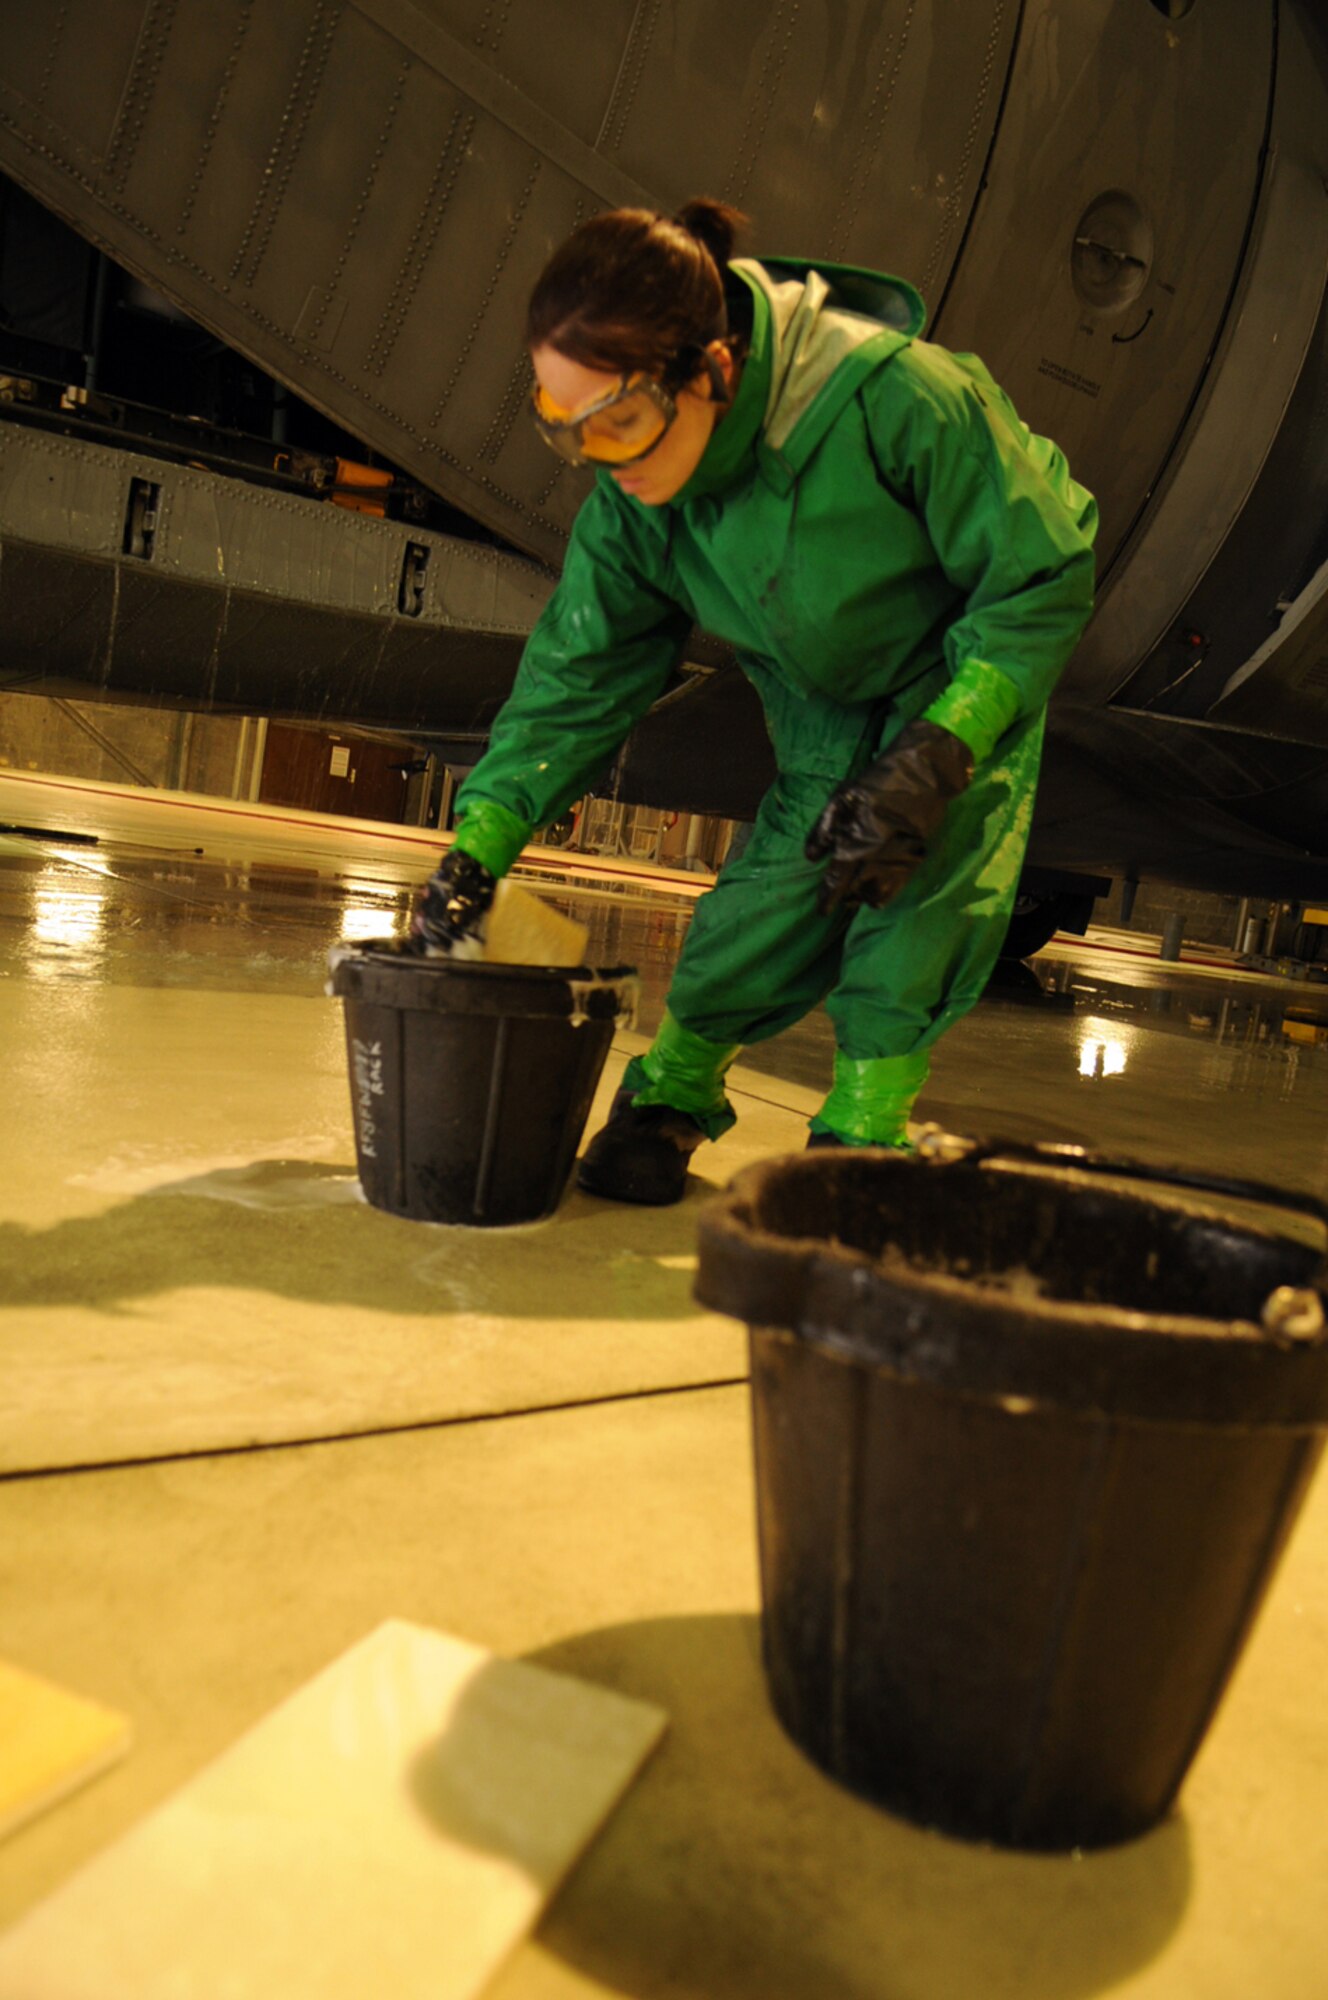 Airman 1st Class Stephanie Hall, 86th Aircraft Maintenance Squadron crew chief, soaps up a sponge to wash the tail end of a C-130E Hercules aircraft in Hangar 1, Ramstein Air Base, Germany, Oct. 28, 2008. The wash crew is made up of a 12-member team from the 86th AMXS who wash aircraft every 90 days to keep them mission ready. (U.S. Air Force photo by Airman 1st Class Scott Saldukas)